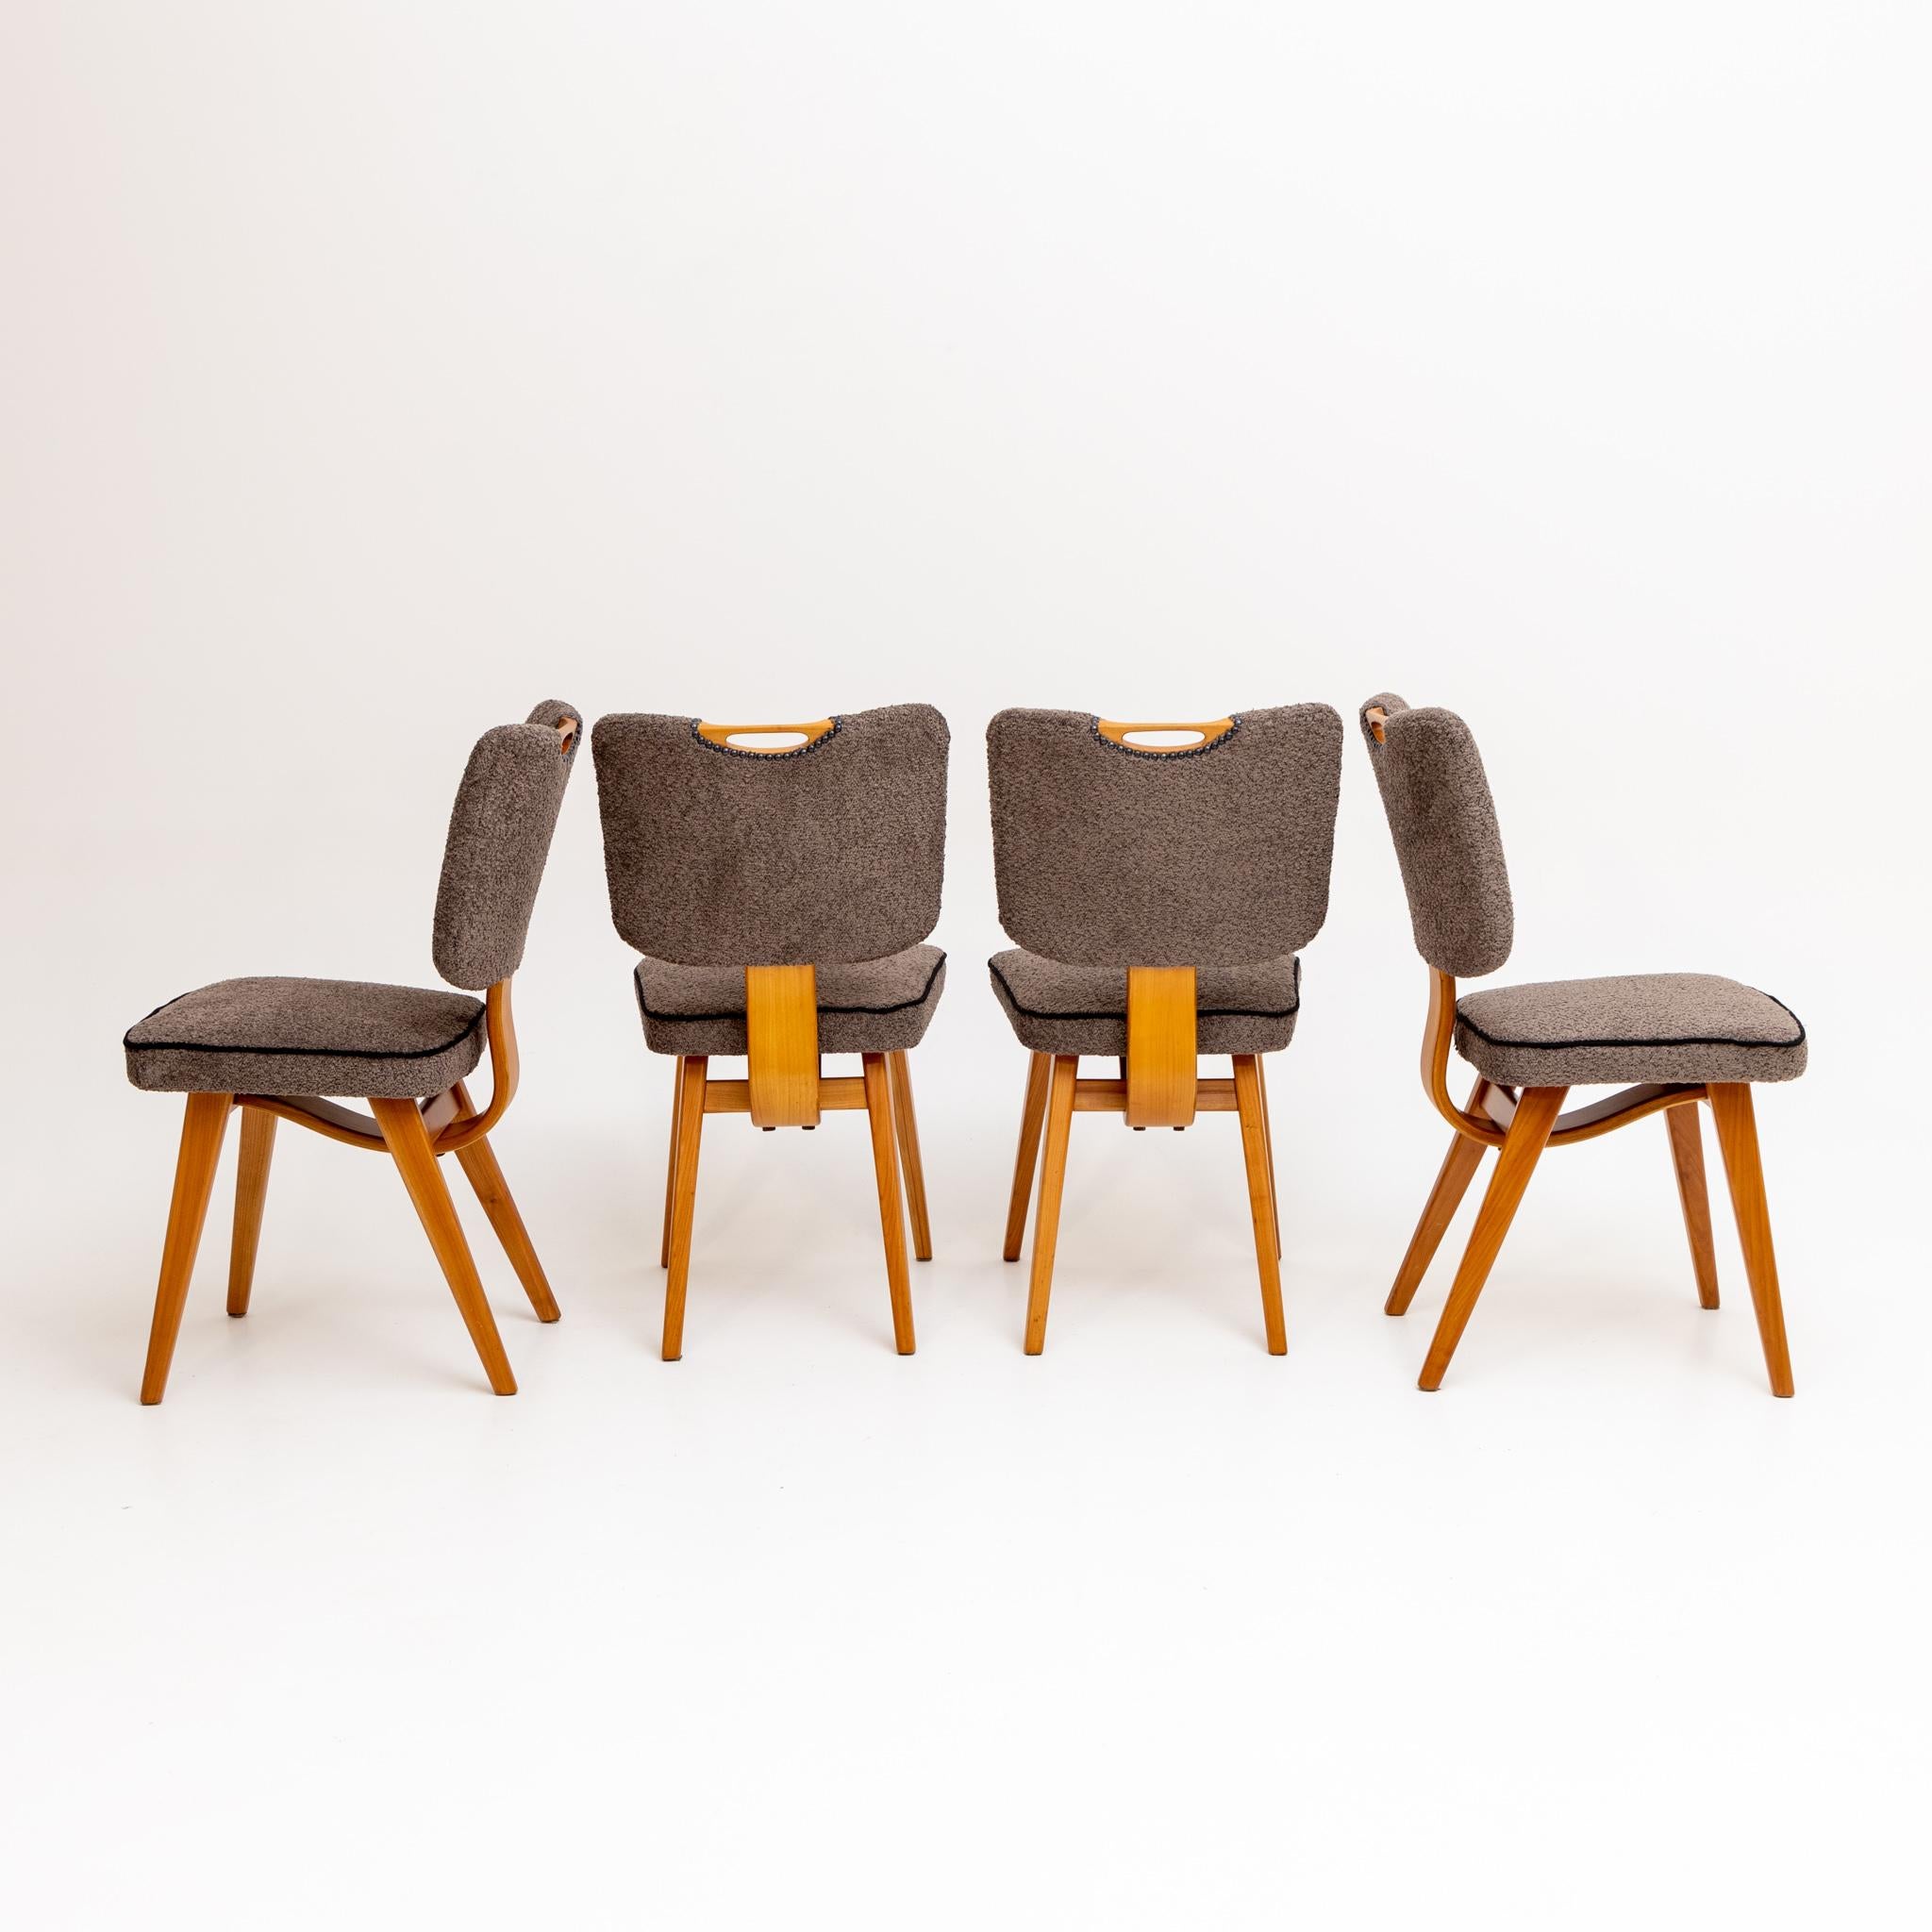 Four Chairs, Italian Manufactory, Mid-20th Century 1